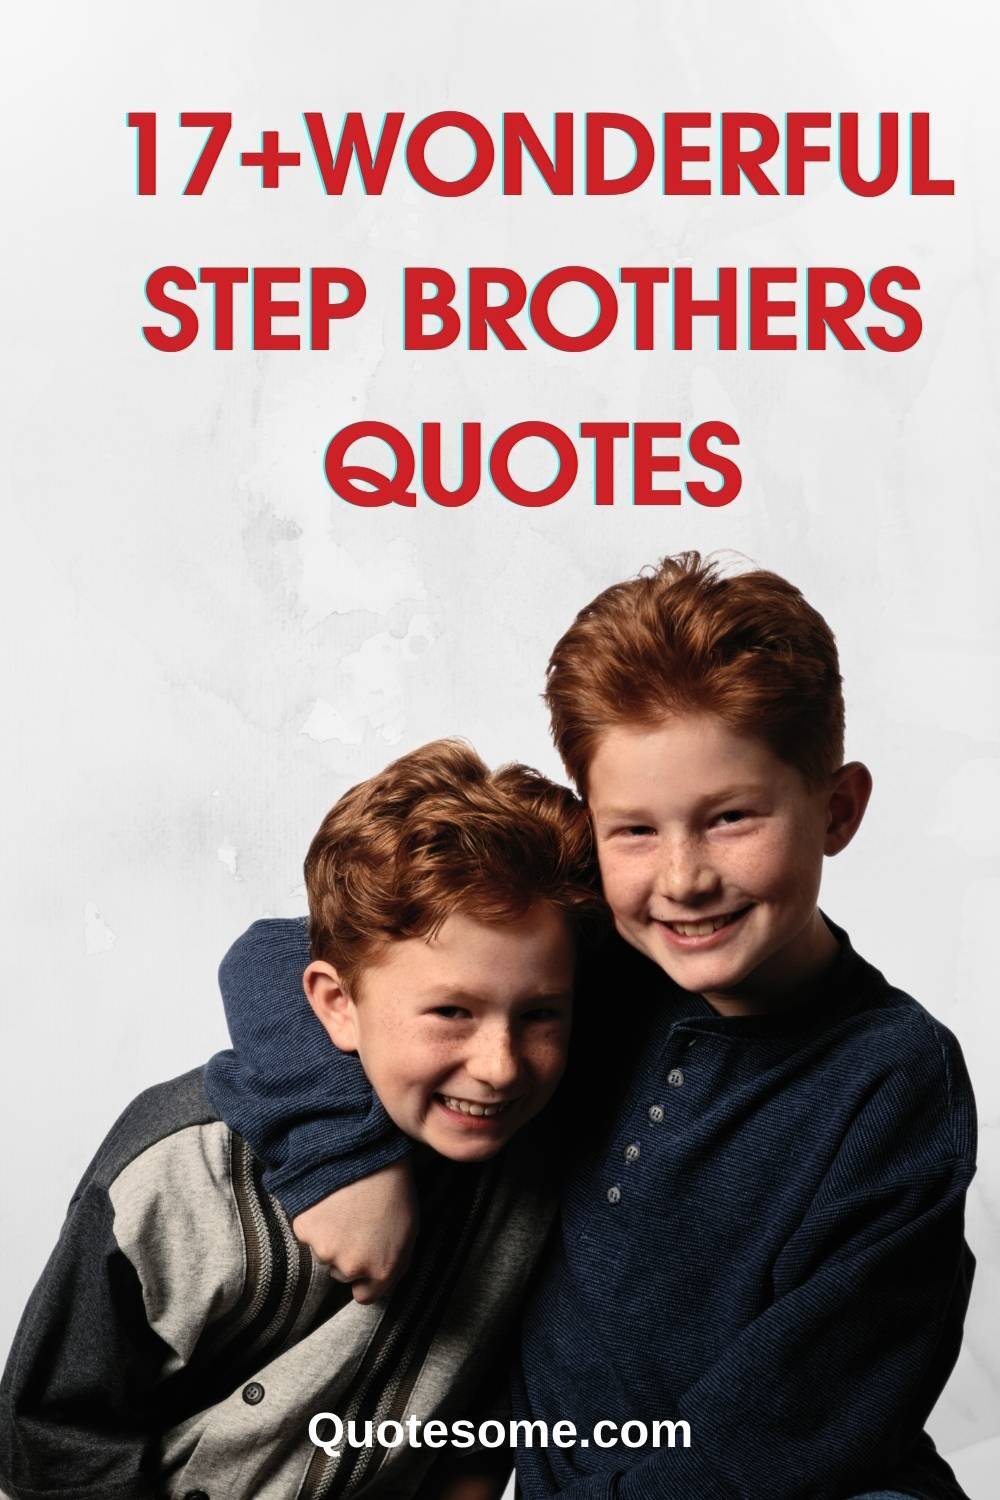 STEP BROTHERS QUOTES